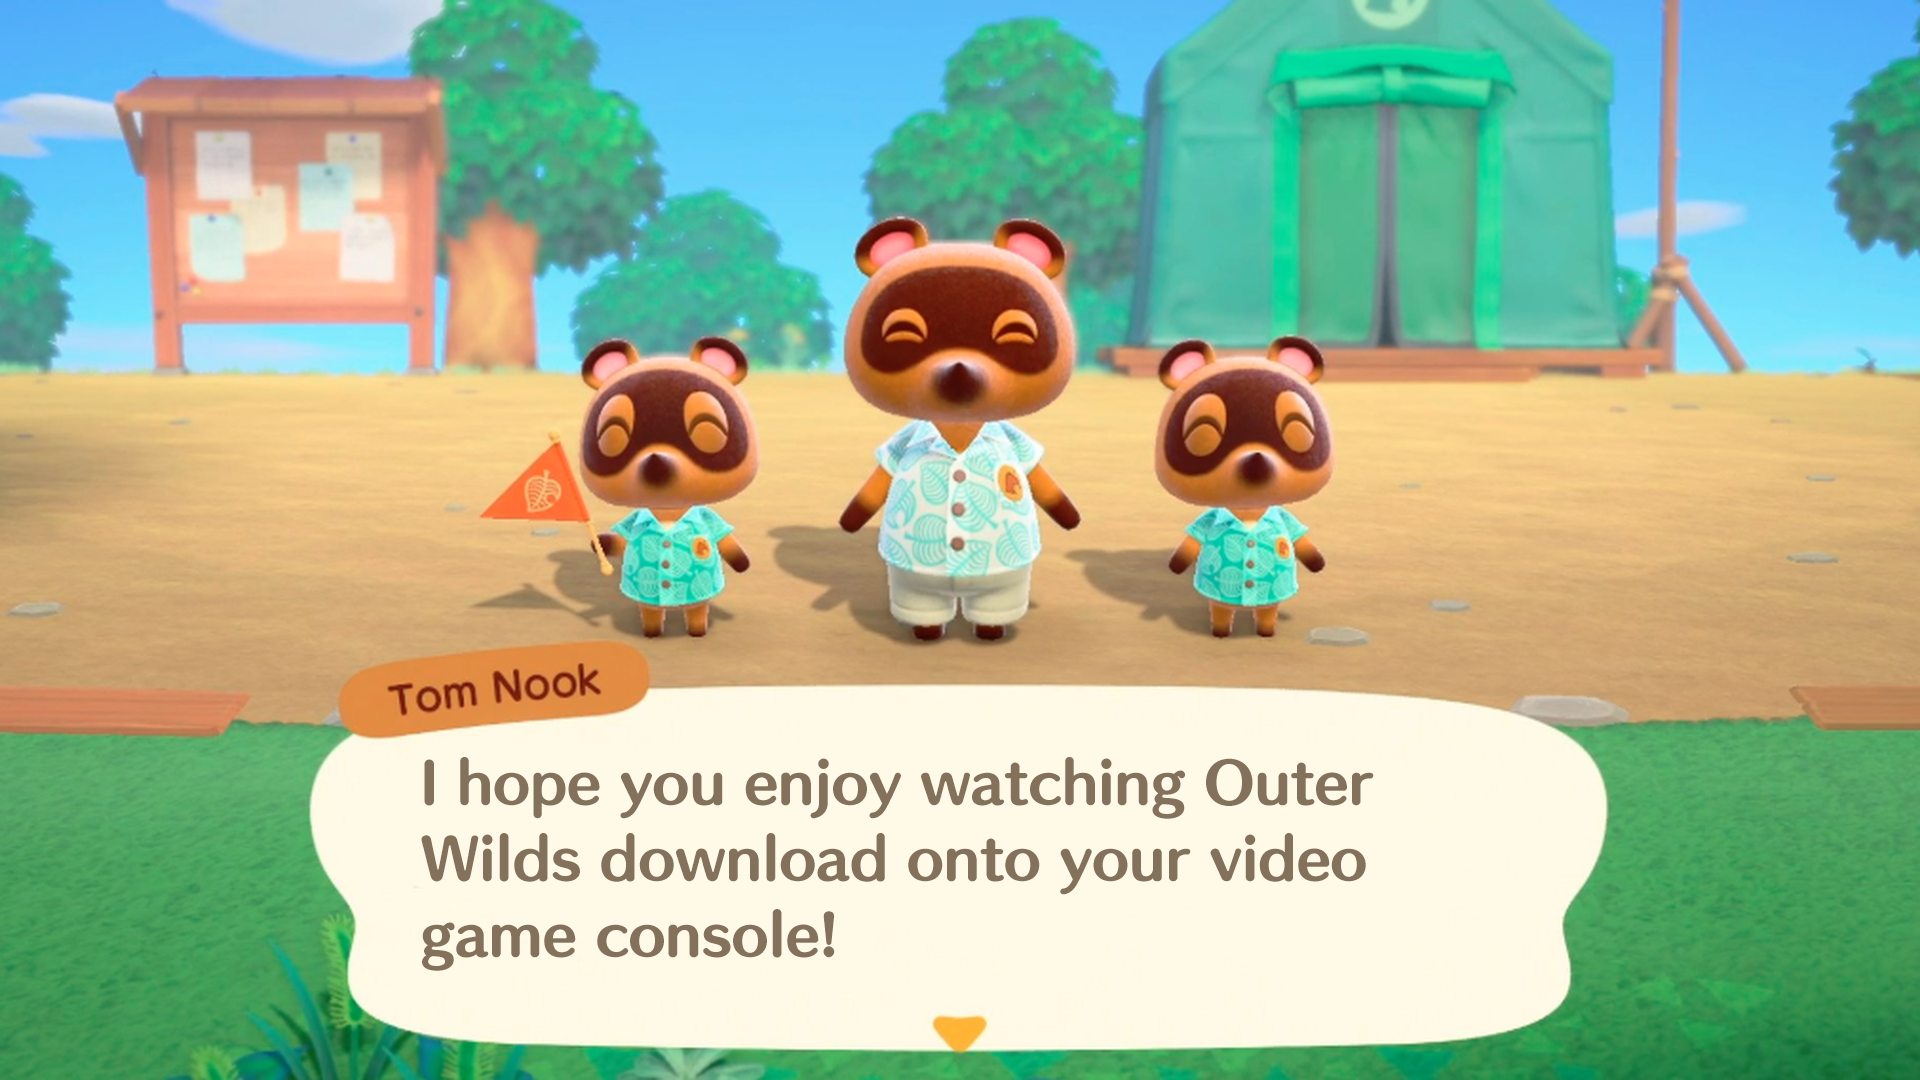 I hope you enjoy watching Outer Wilds download onto your video game console!